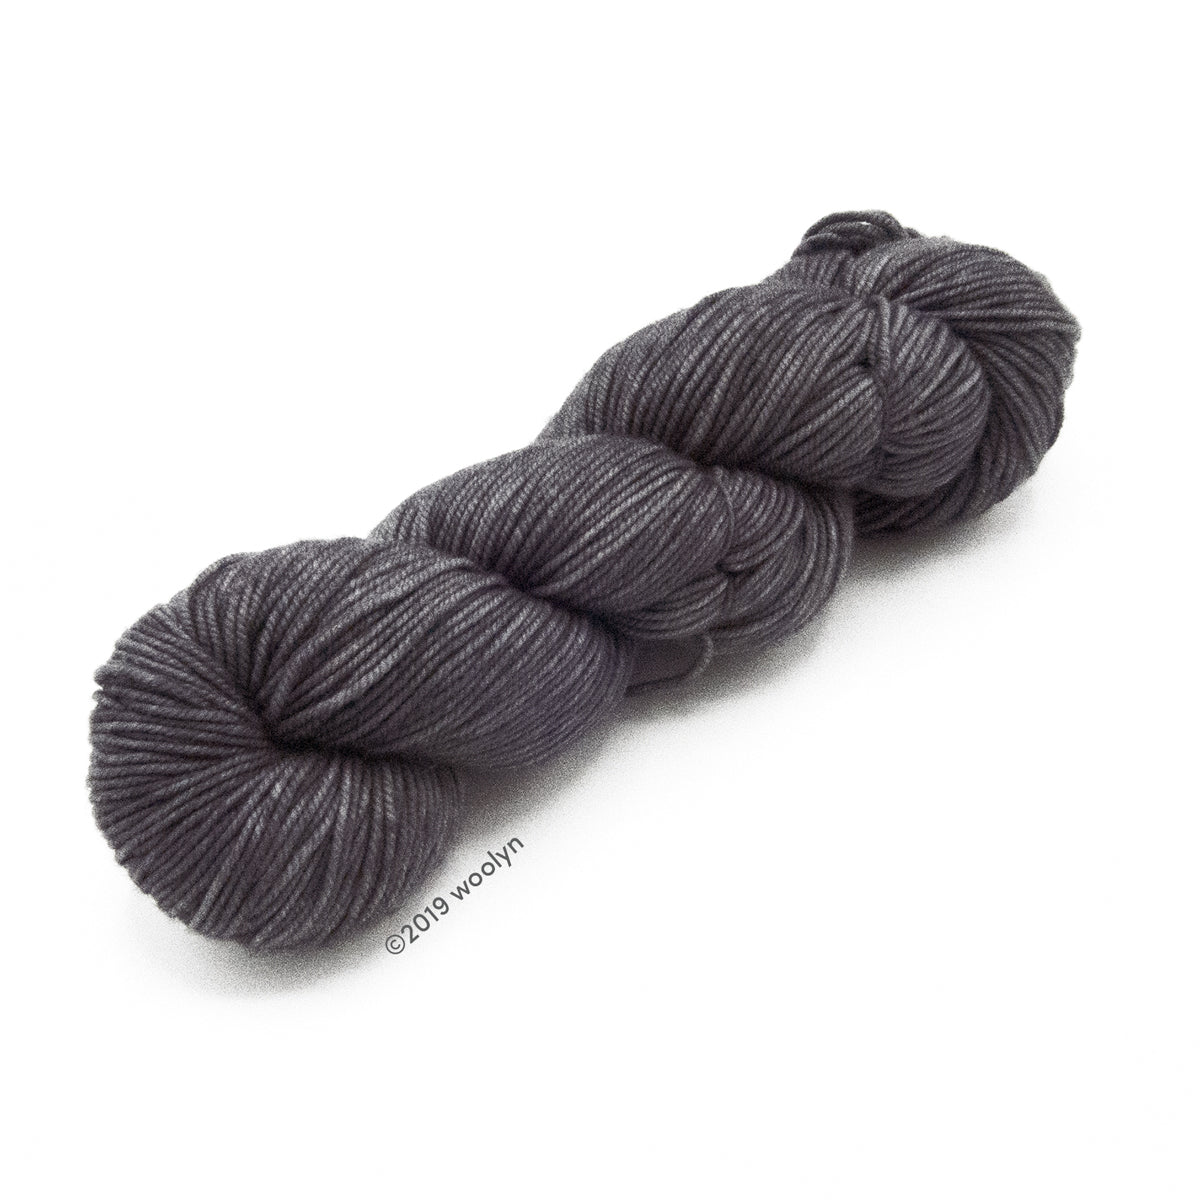 A skein of Knitted Wit Victory DK in Grey Wolf a solid medium grey color. 